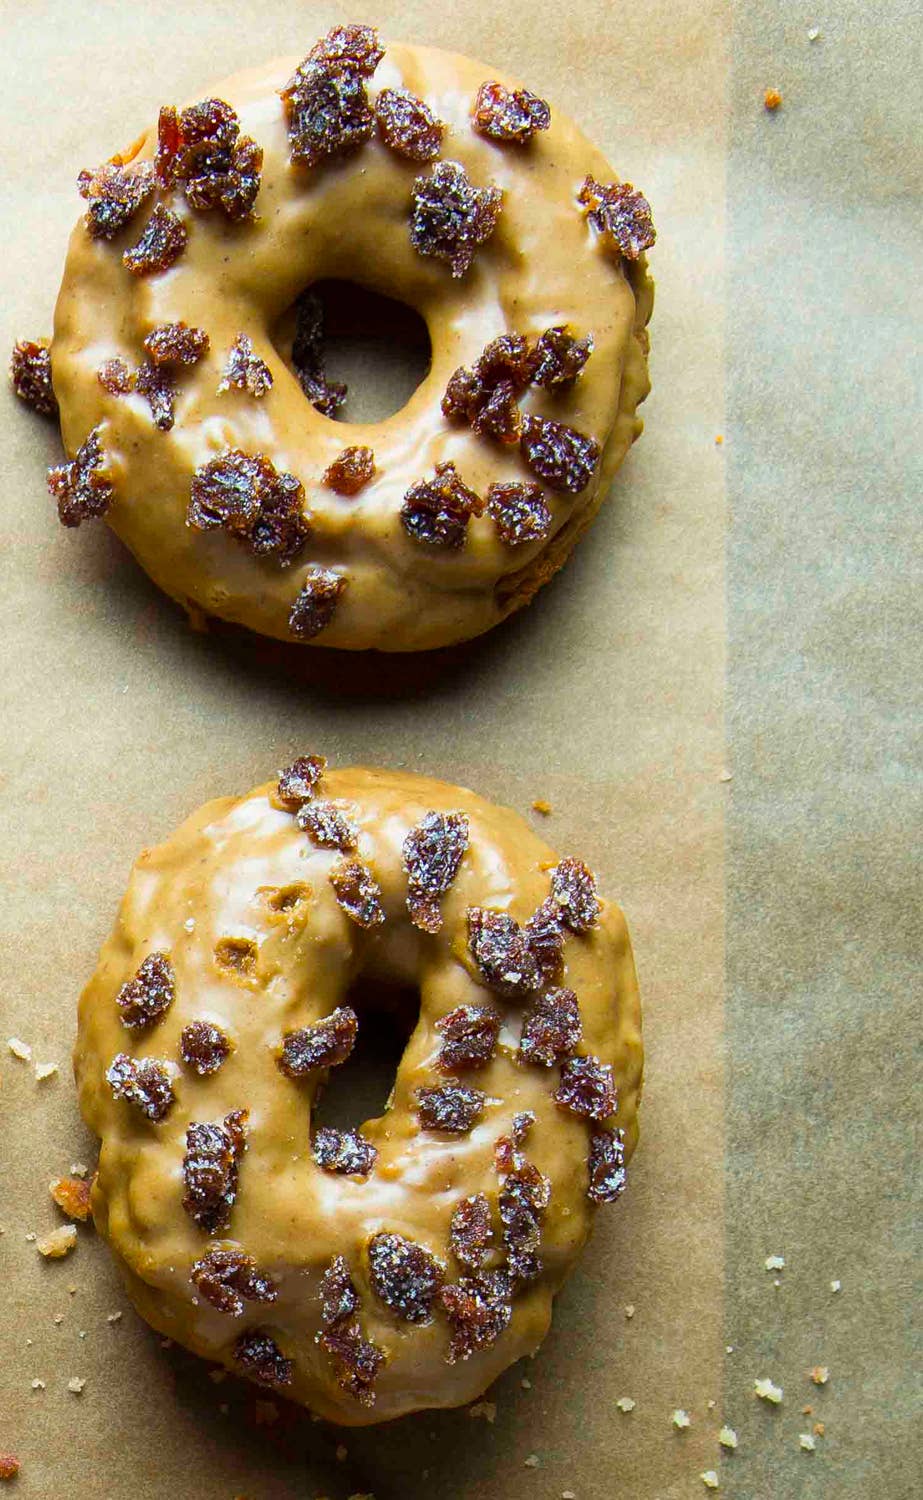 Gluten-Free Oat Old-Fashioned Donuts with Rum Raisin Glaze